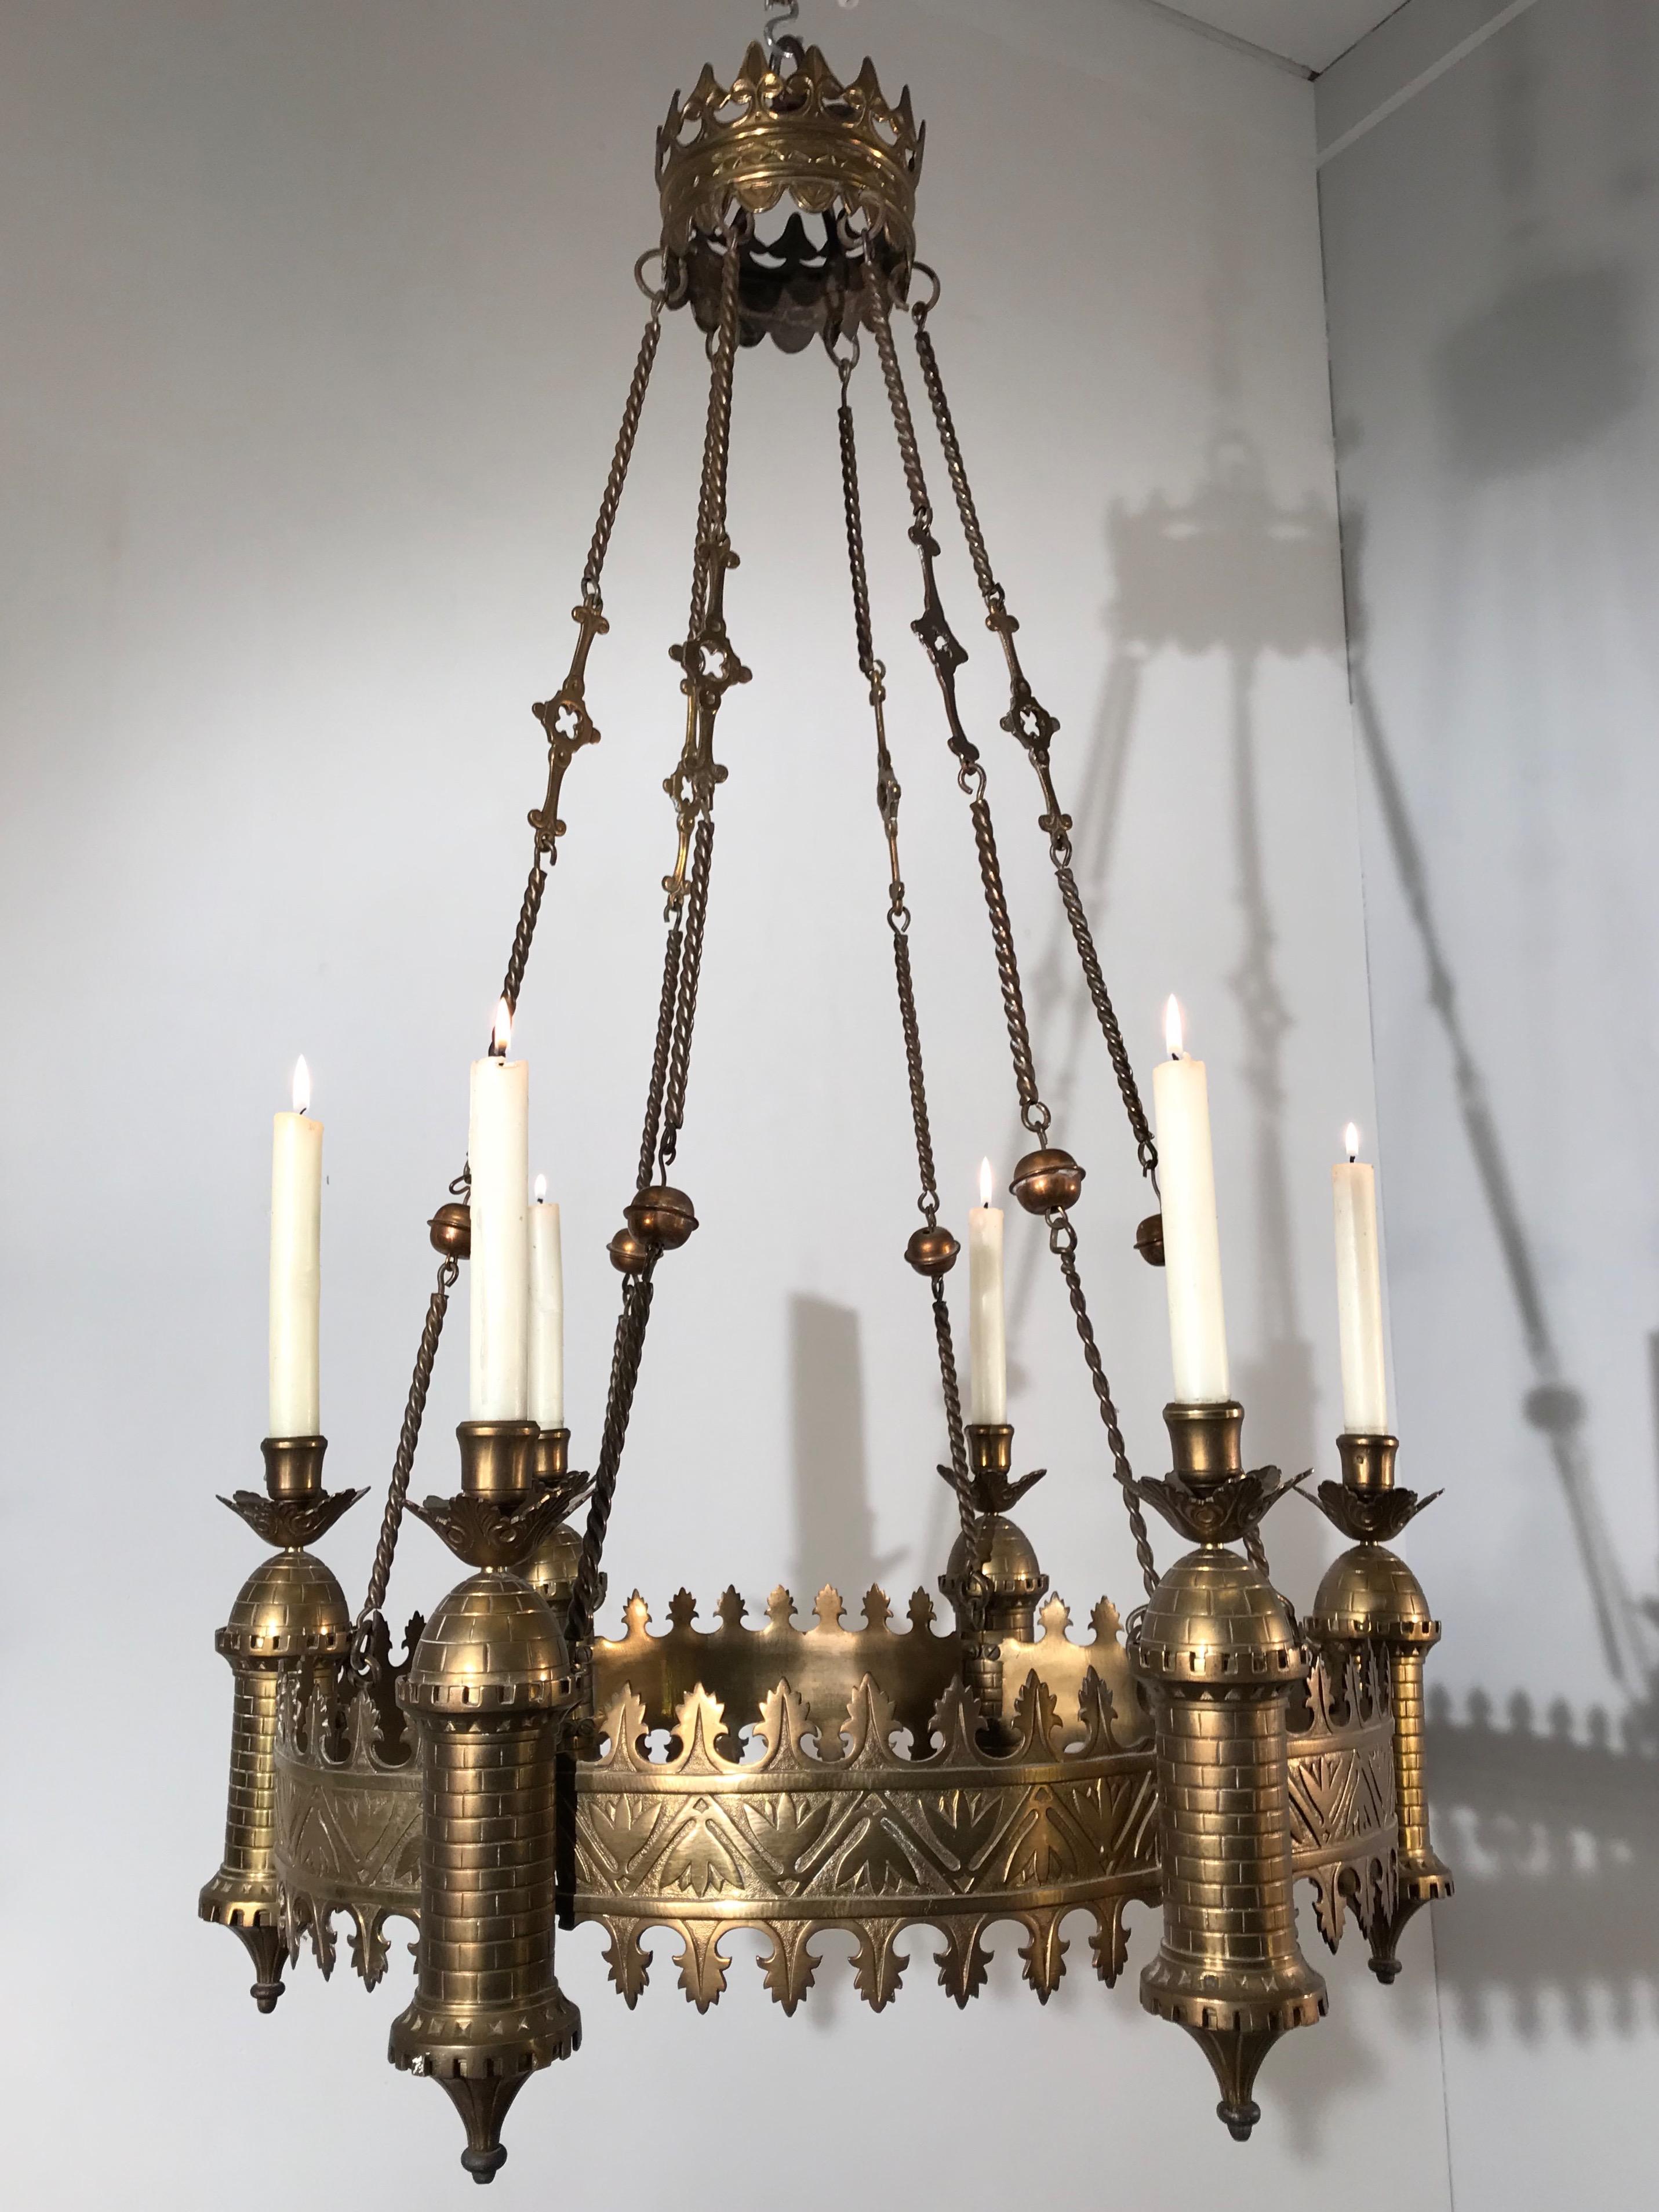 Antique Bronze and Brass Castle Tower Design Gothic Revival Candle Chandelier 5